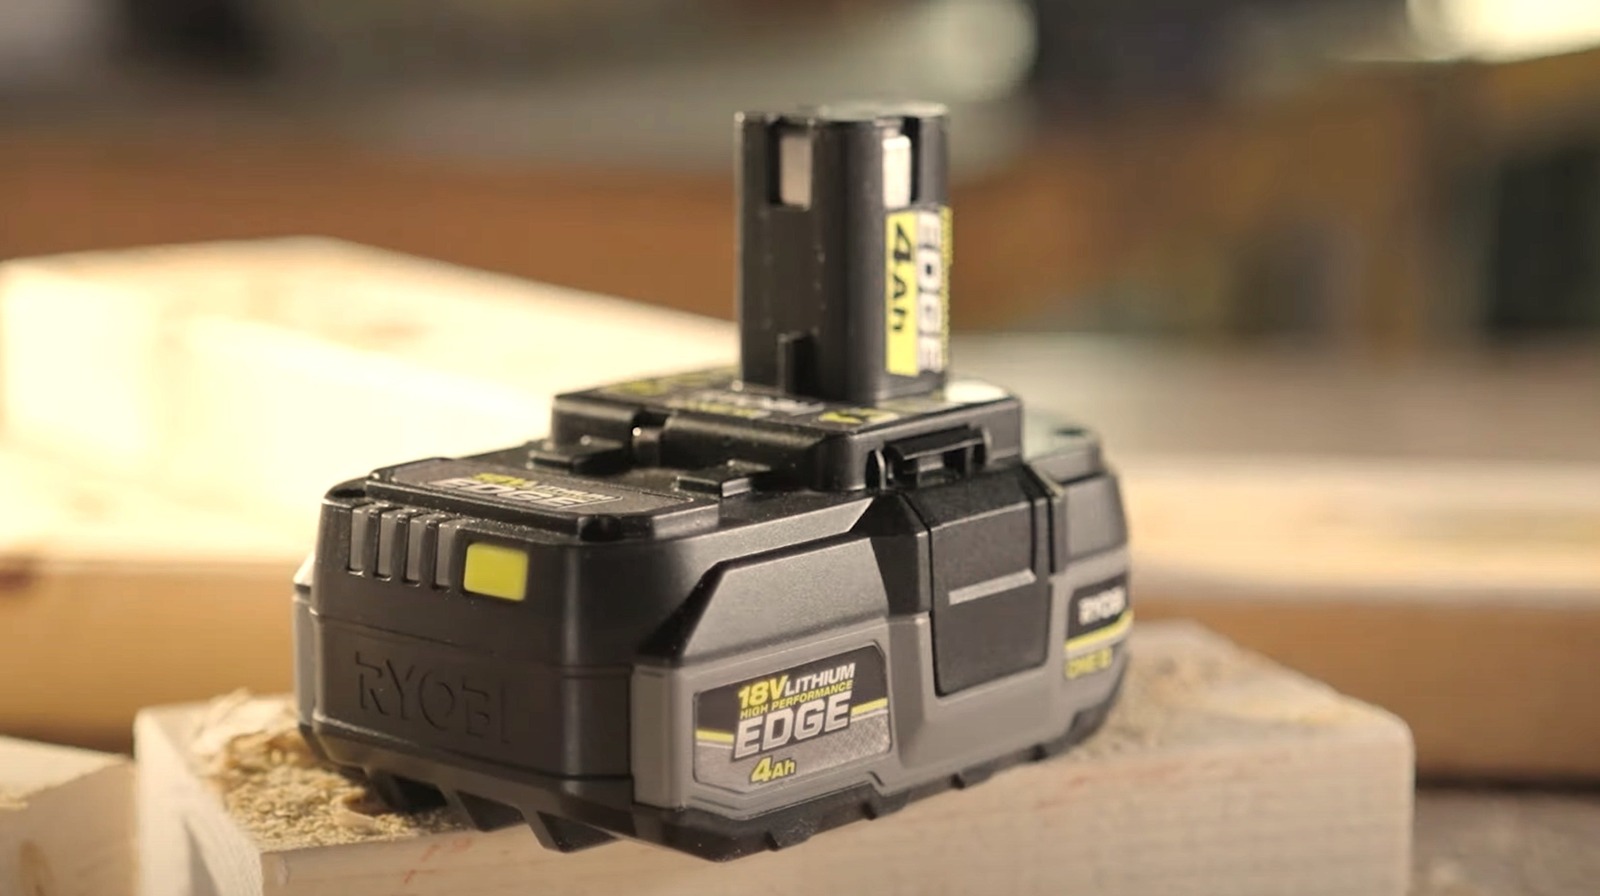 The Complete Guide to Ryobi EDGE Technology